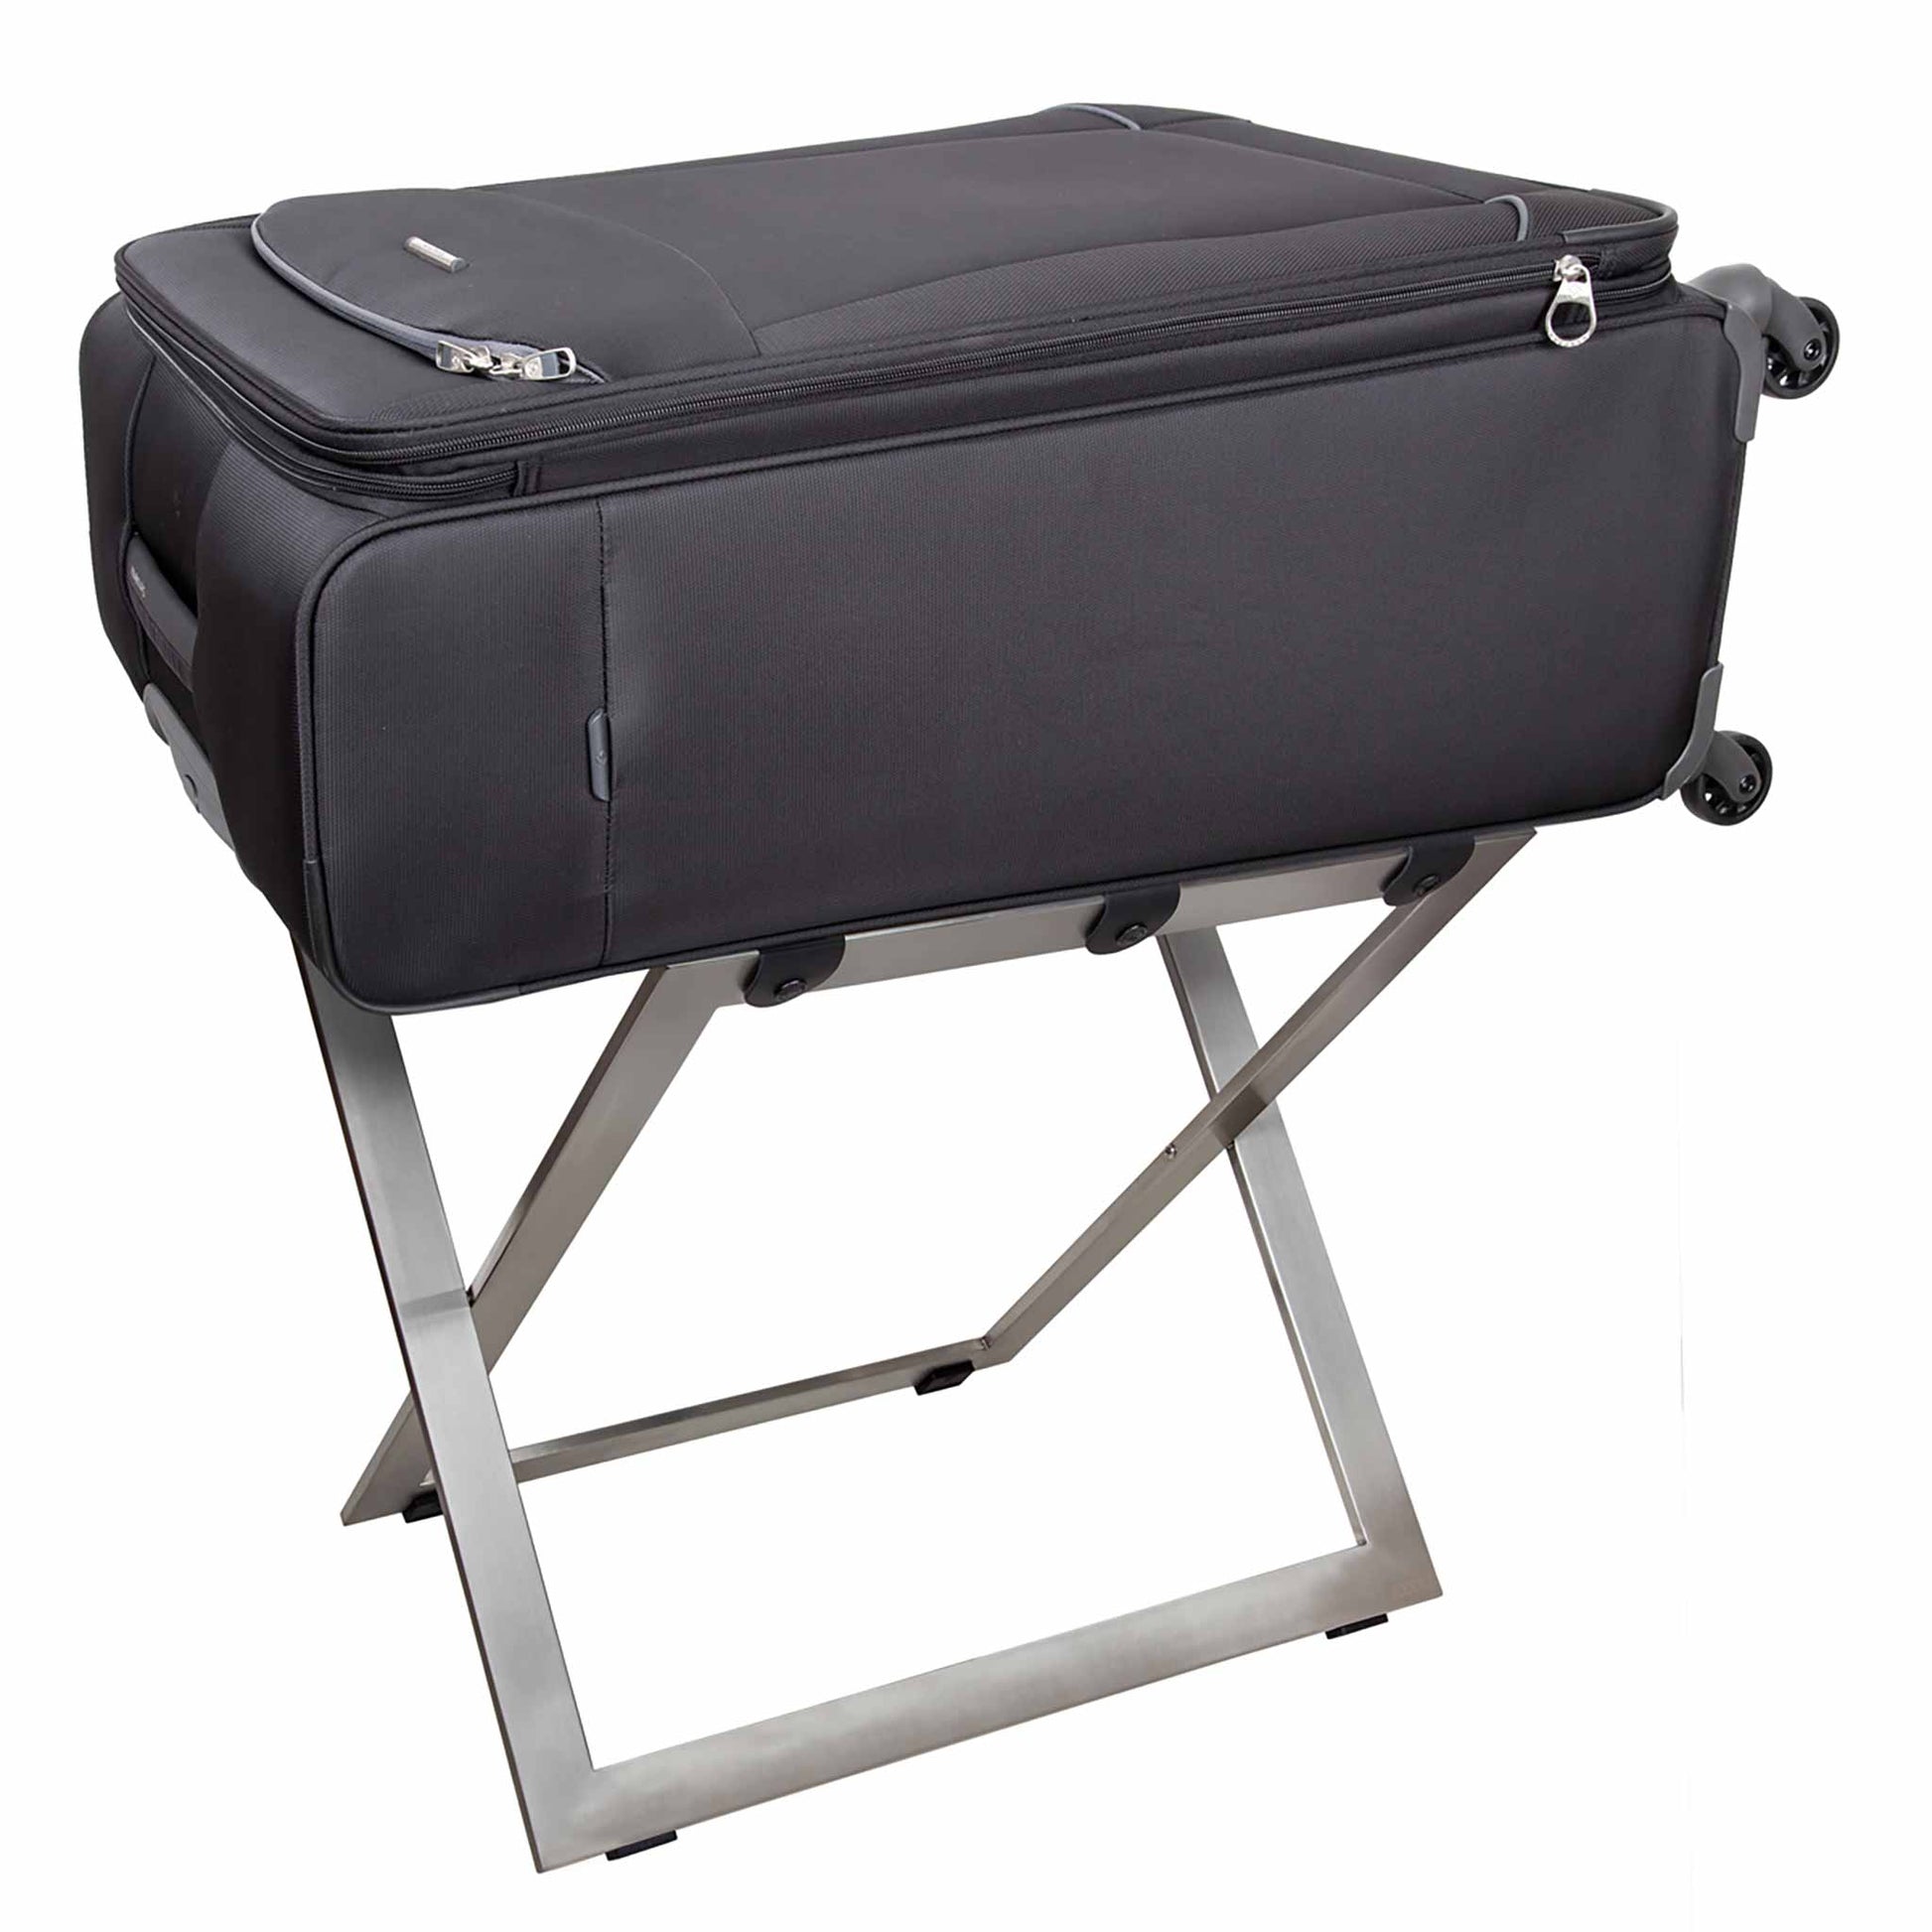 Suitcase on Roootz stainless steel compact hotel luggage rack with black leather straps